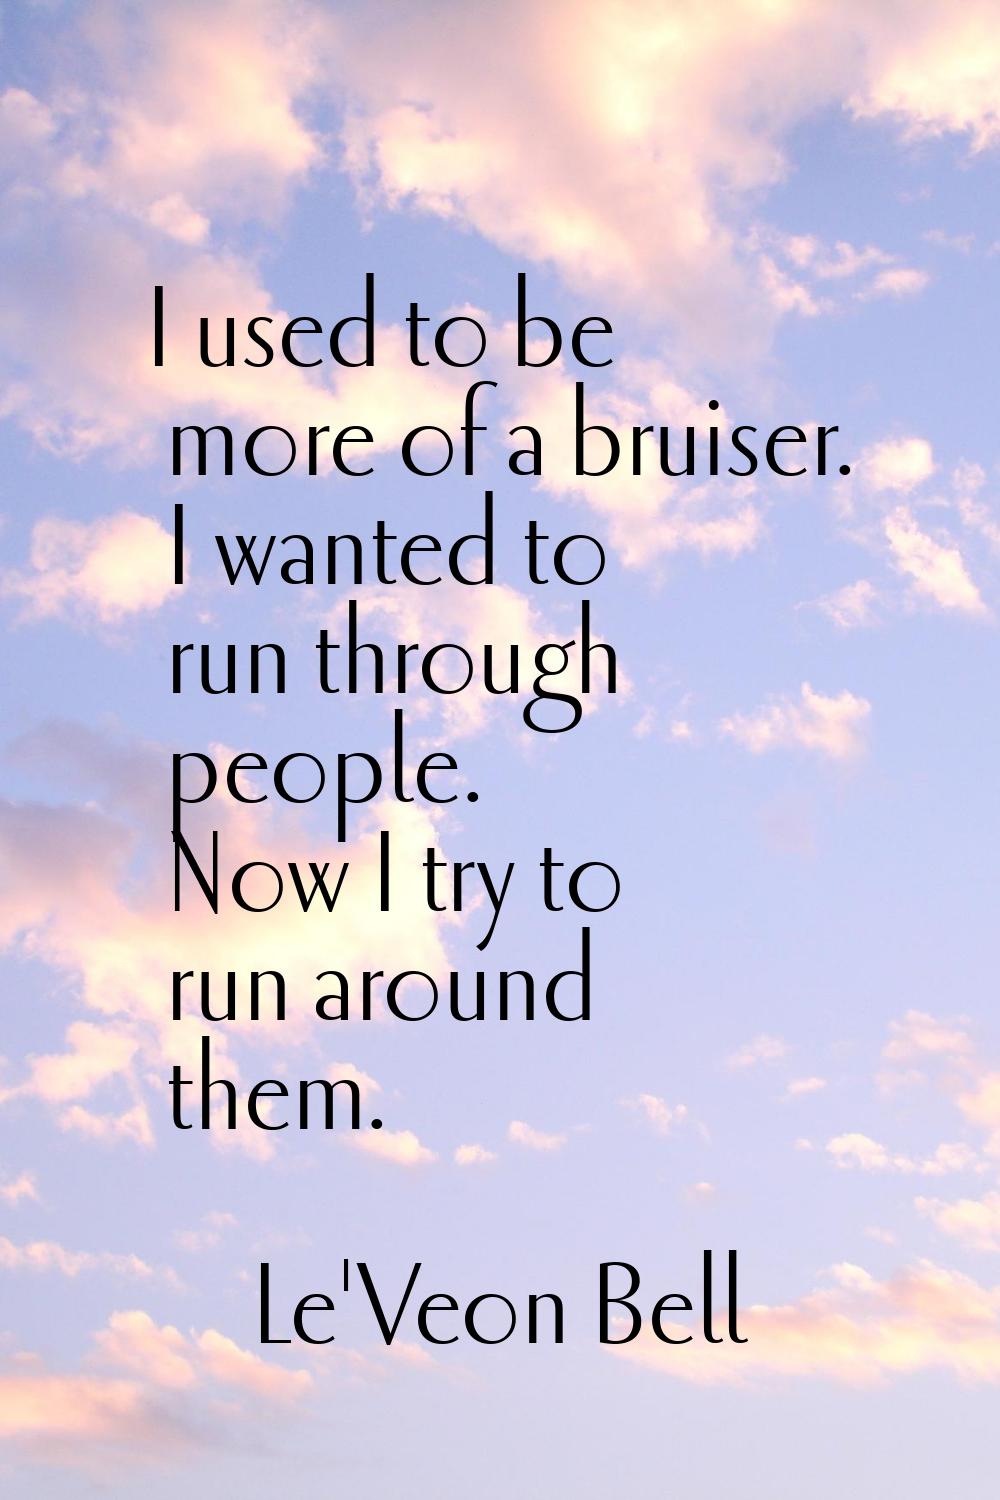 I used to be more of a bruiser. I wanted to run through people. Now I try to run around them.